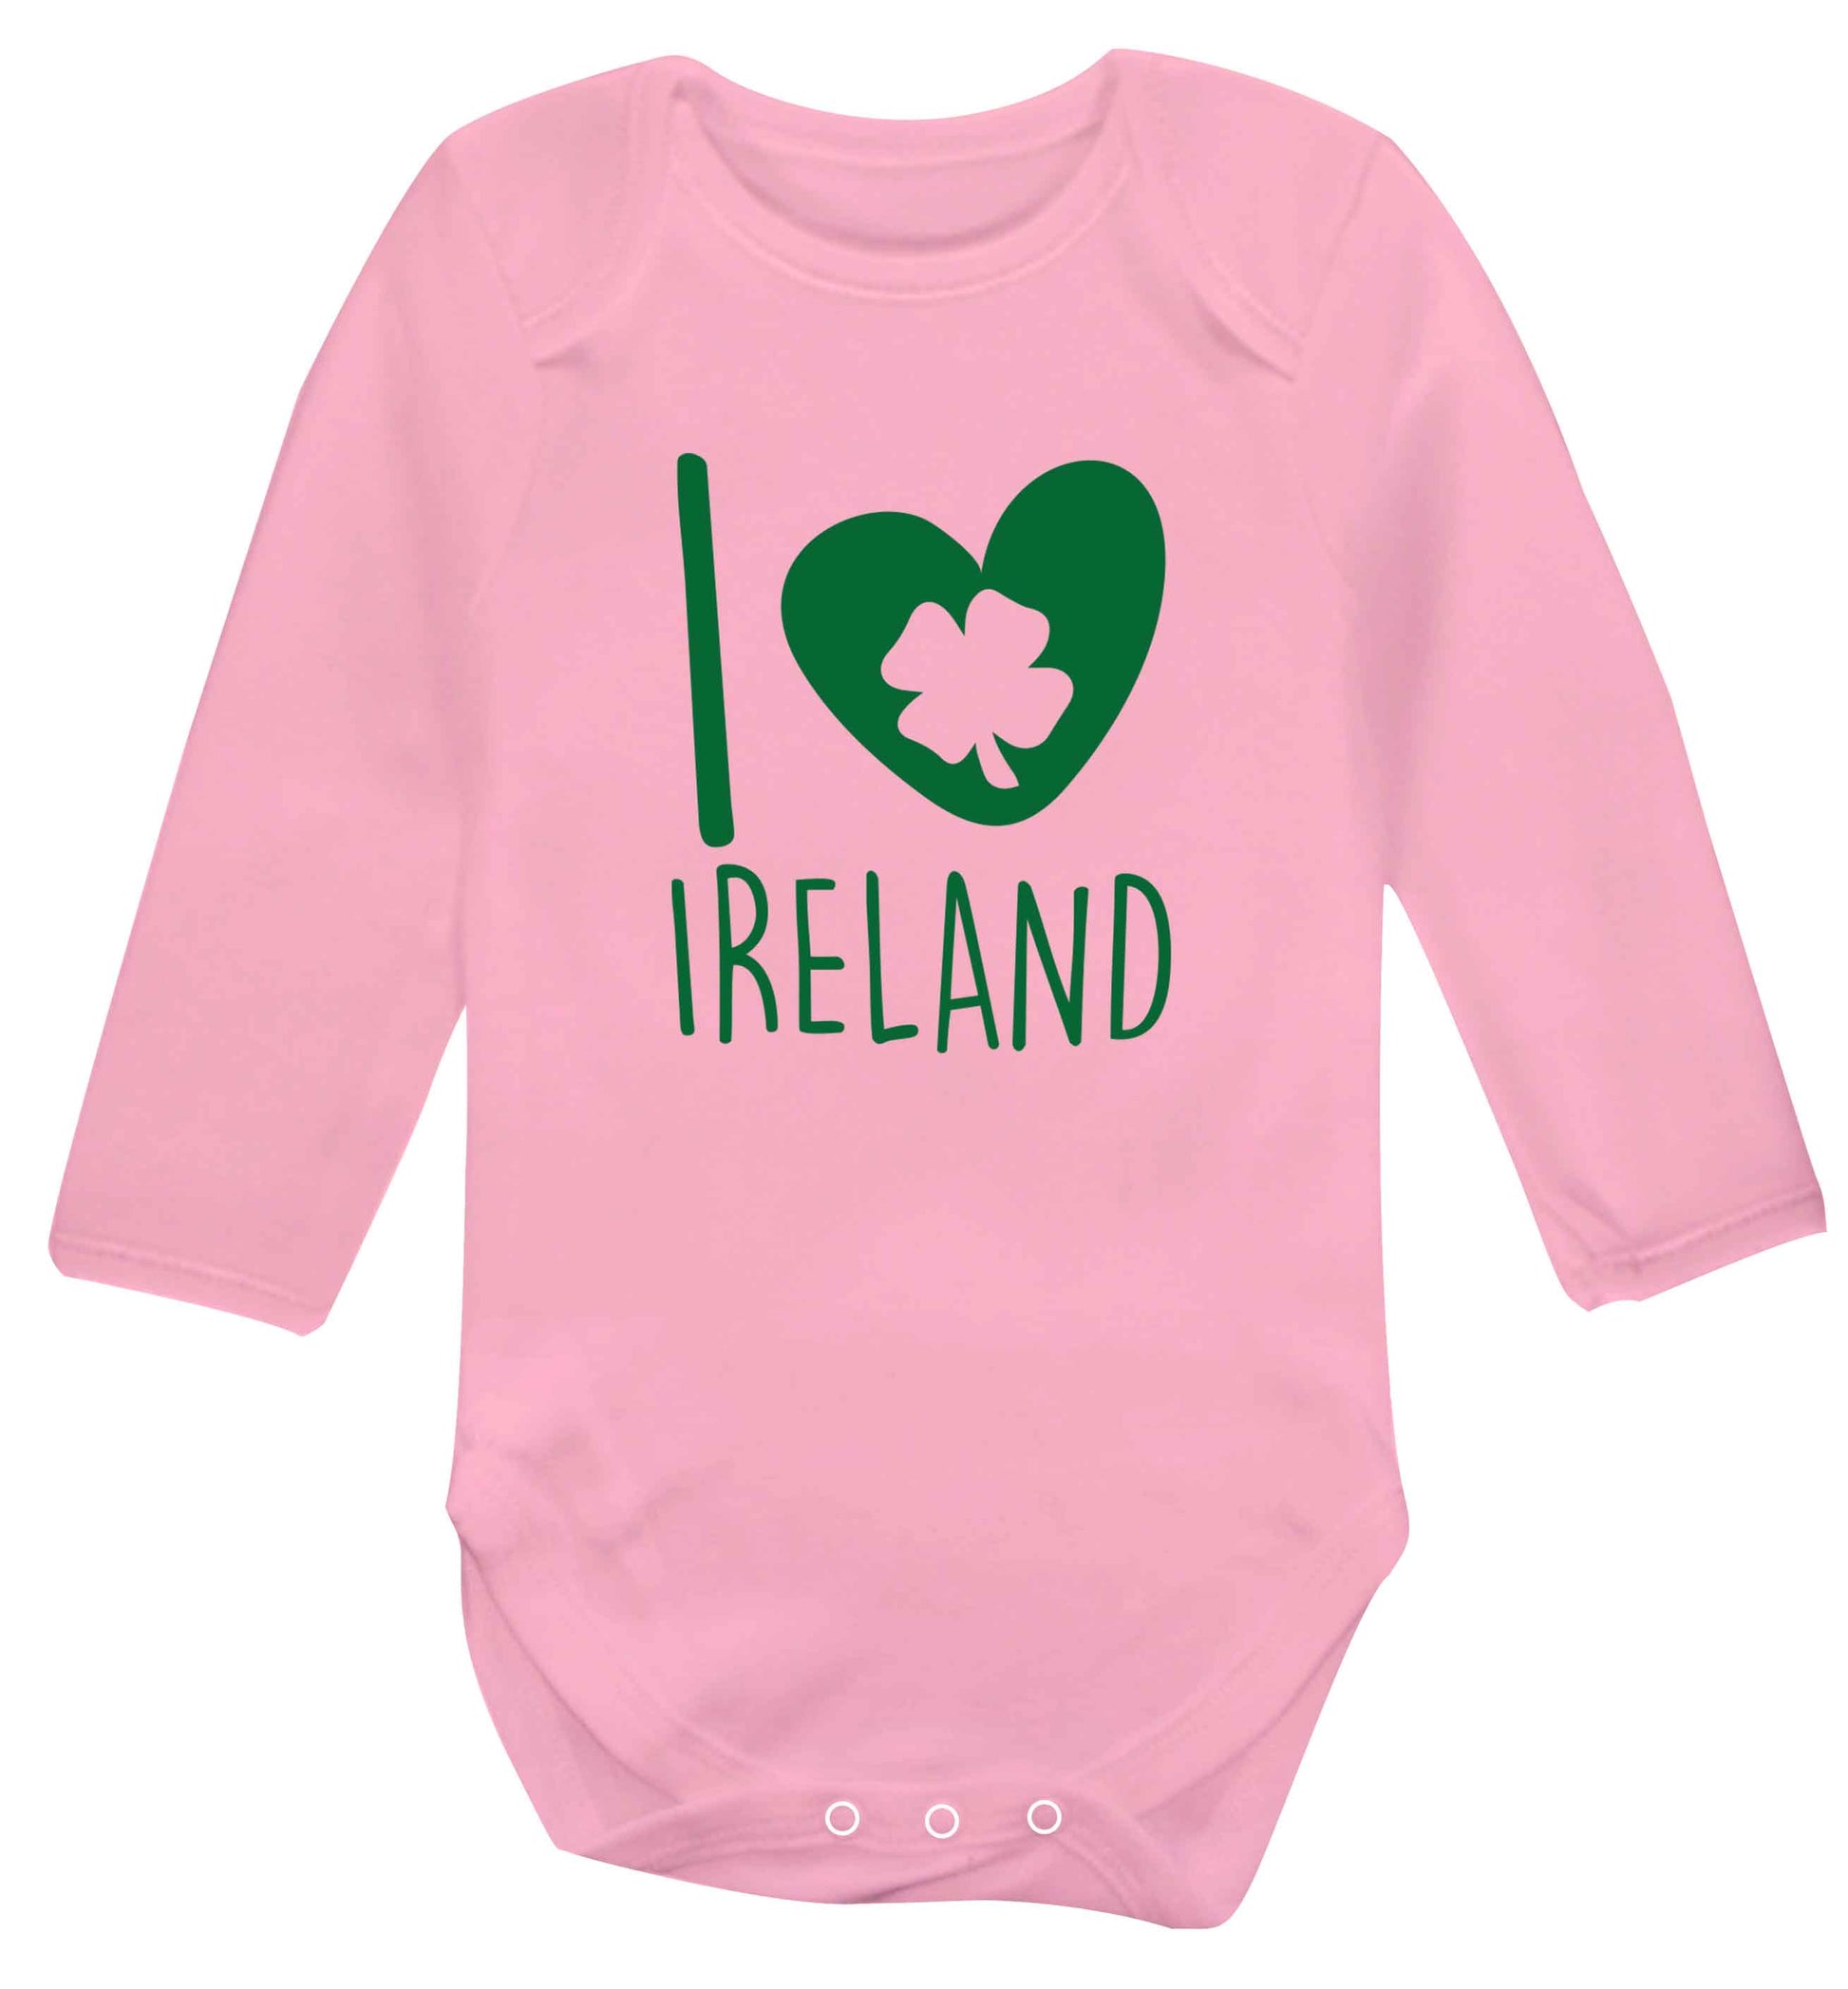 I love Ireland baby vest long sleeved pale pink 6-12 months